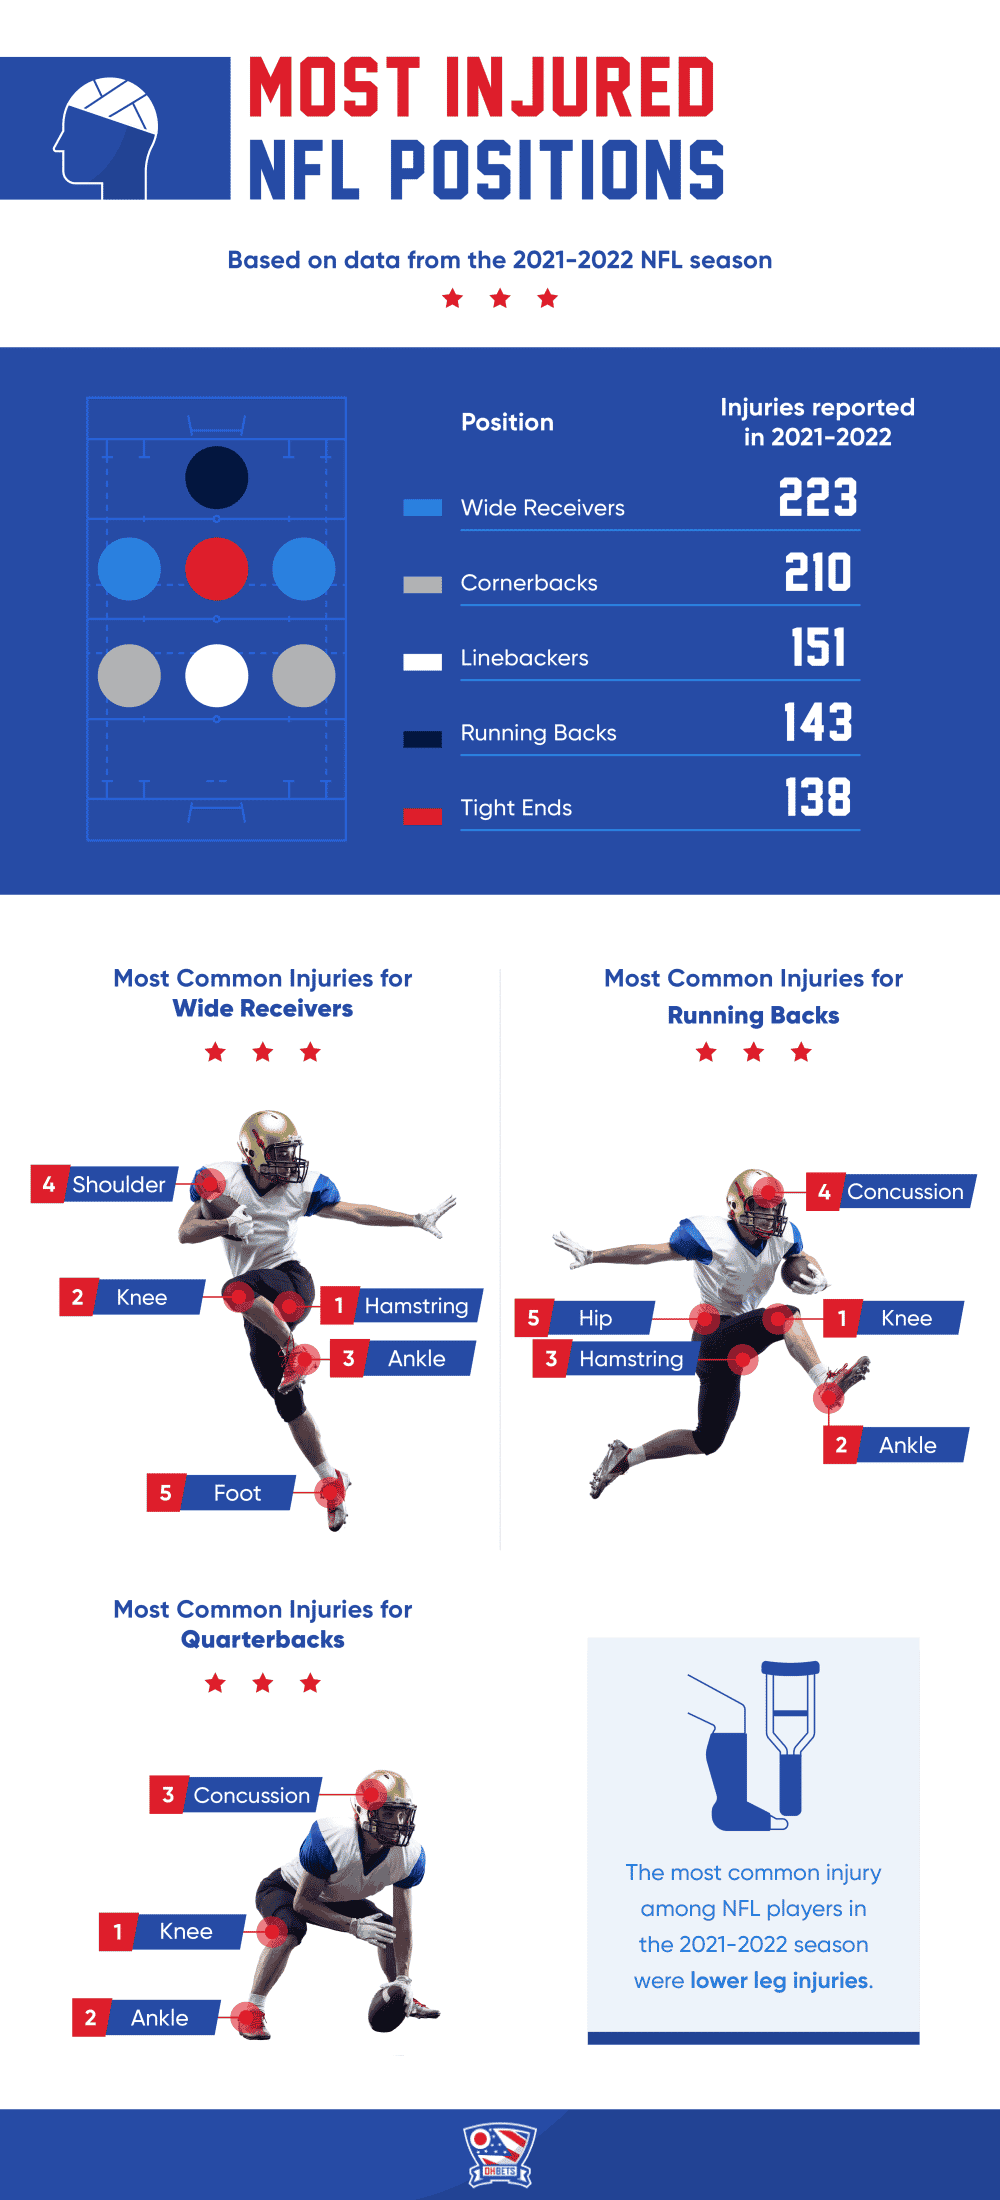 Most injured NFL positions